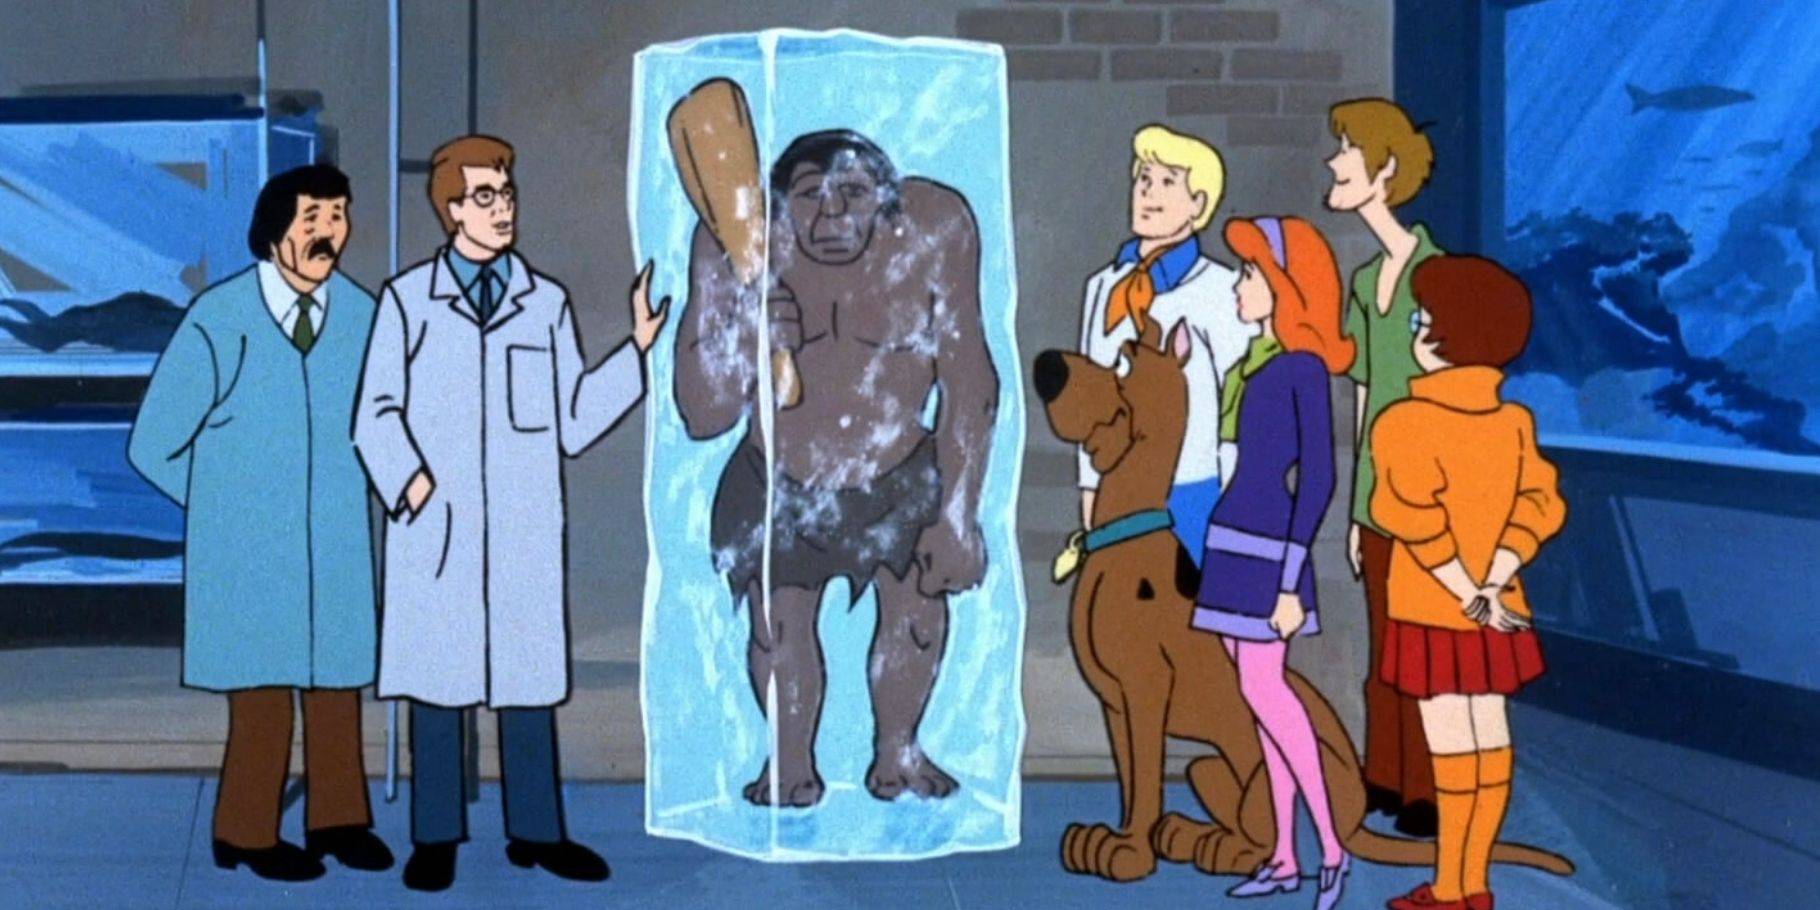 The Scooby gang examines a frozen caveman with scientists in the original Scooby-Doo series